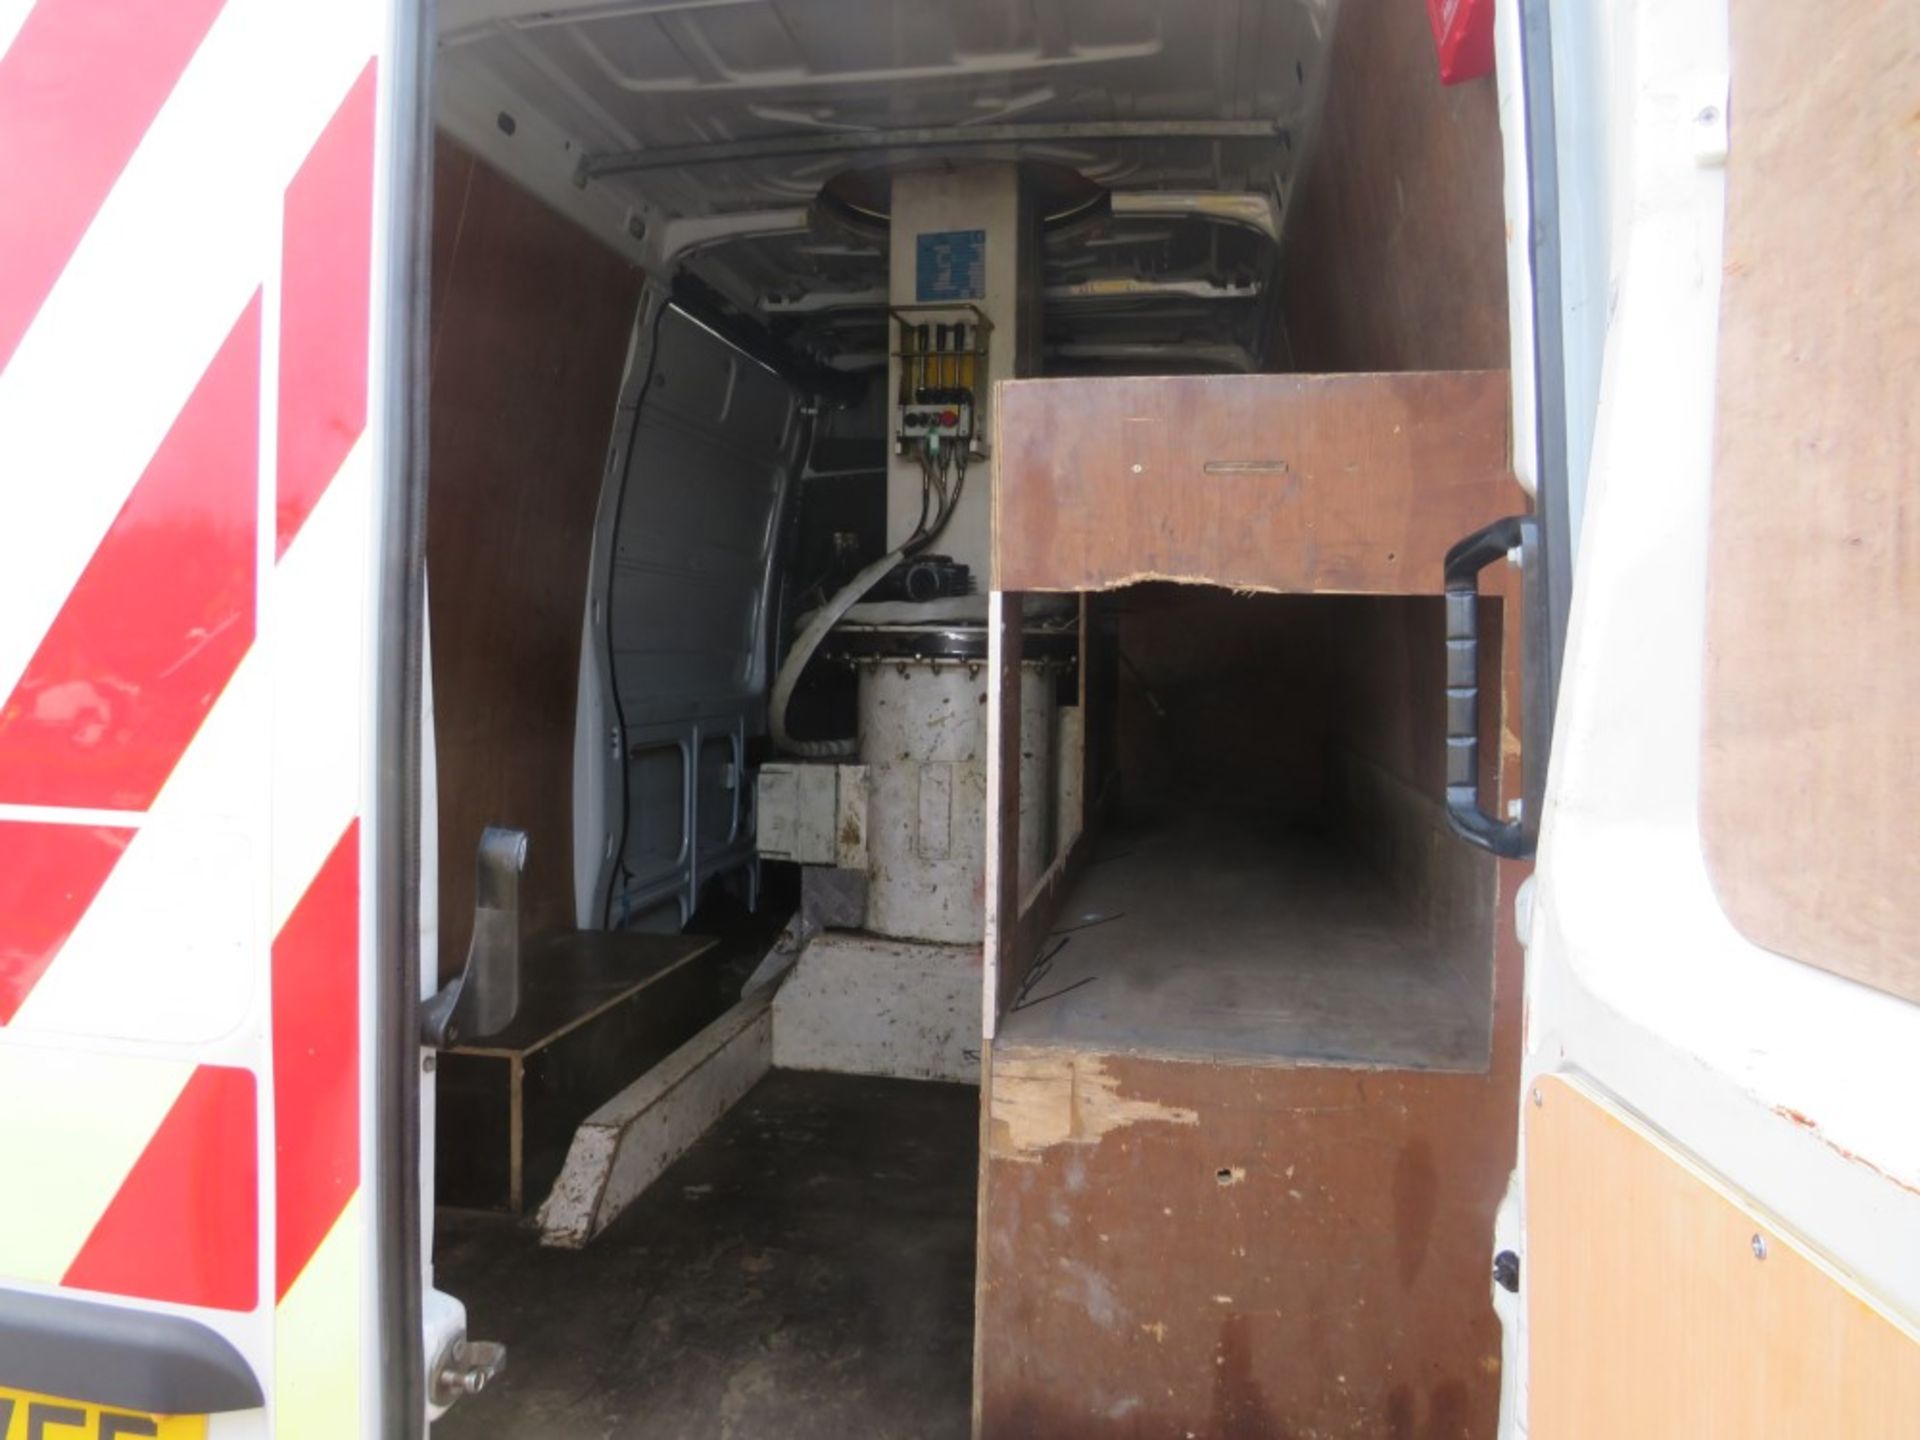 63 reg IVECO DAILY 50C15 CHERRY PICKER, 1ST REG 09/13, TEST 01/21, 72705M WARRANTED, V5 HERE, 3 - Image 5 of 6